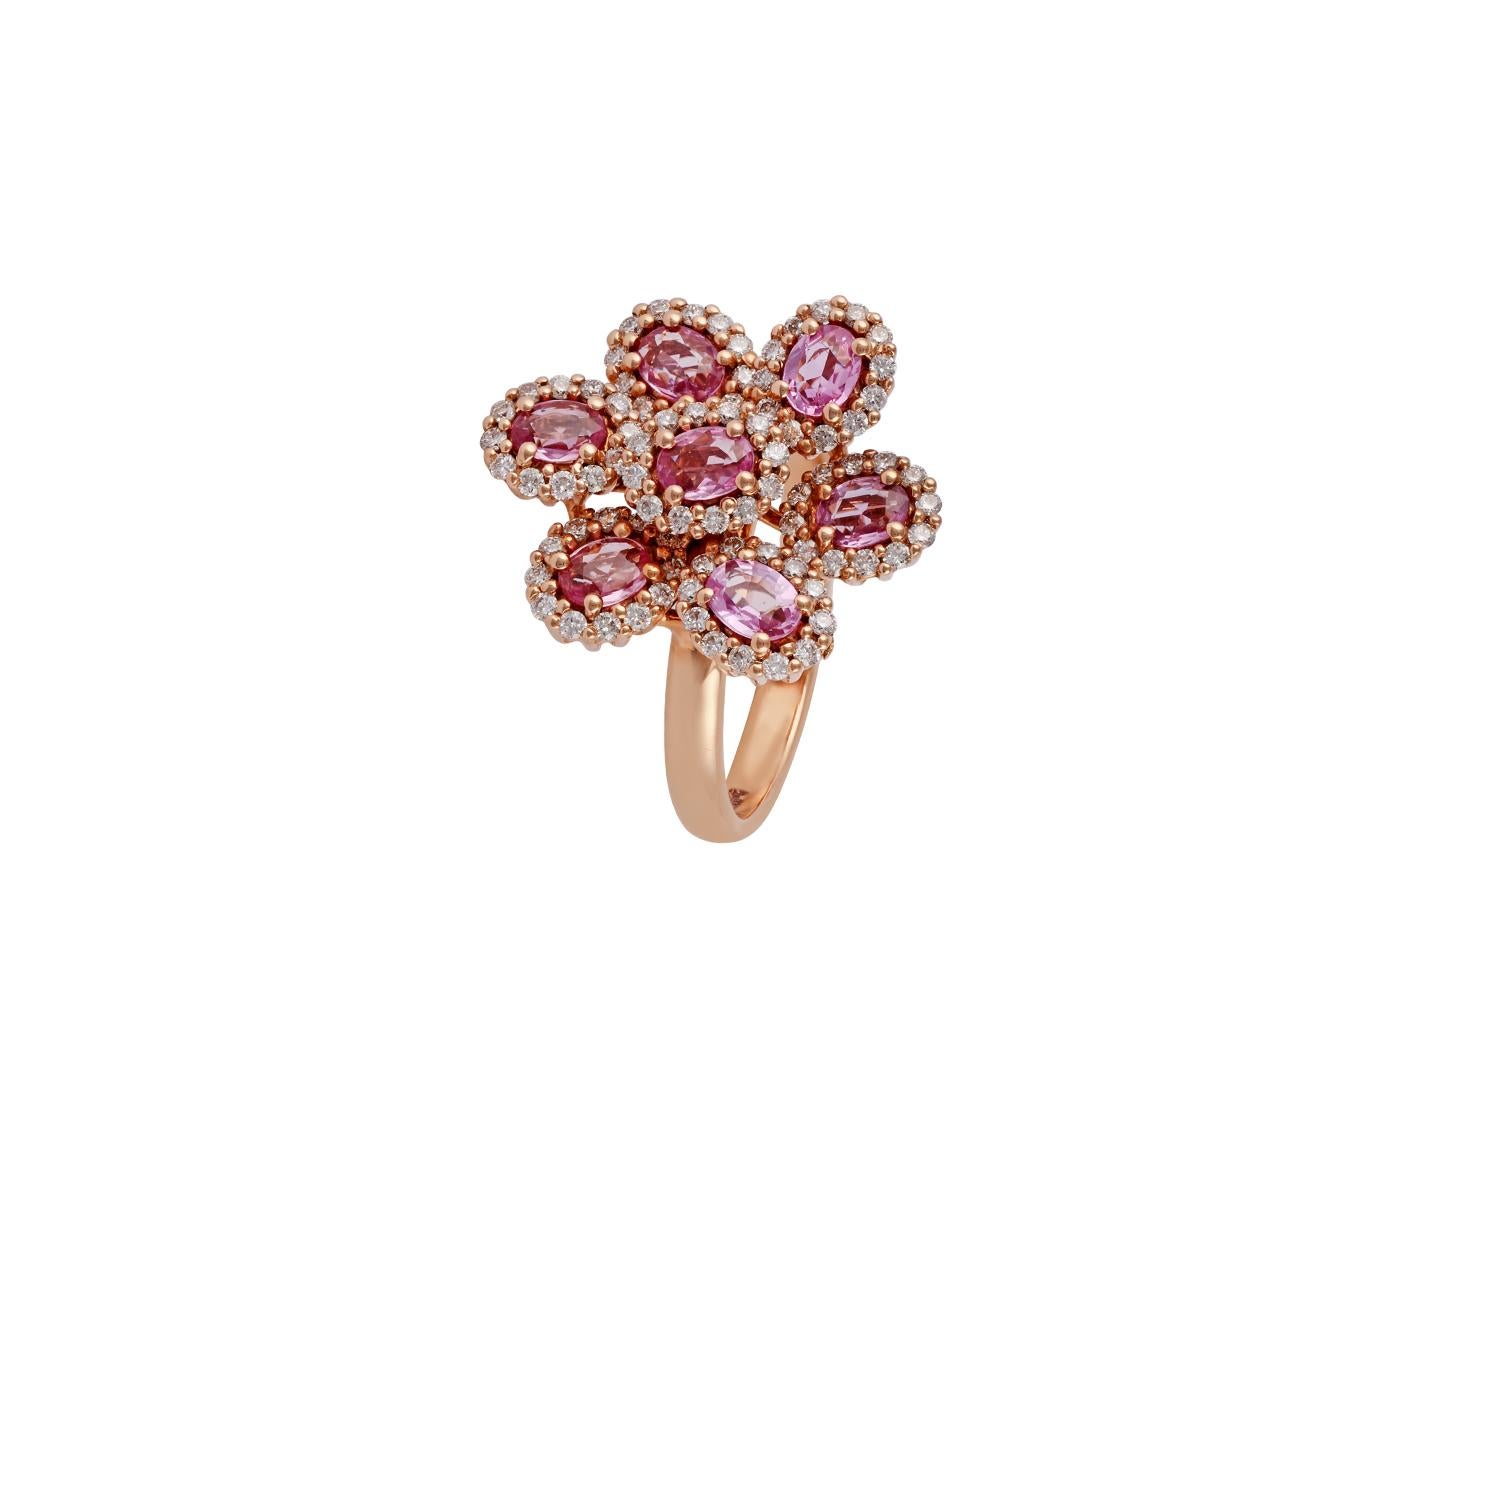 Oval Cut Pink Sapphire & Diamond Ring Studded in 18k Rose Gold